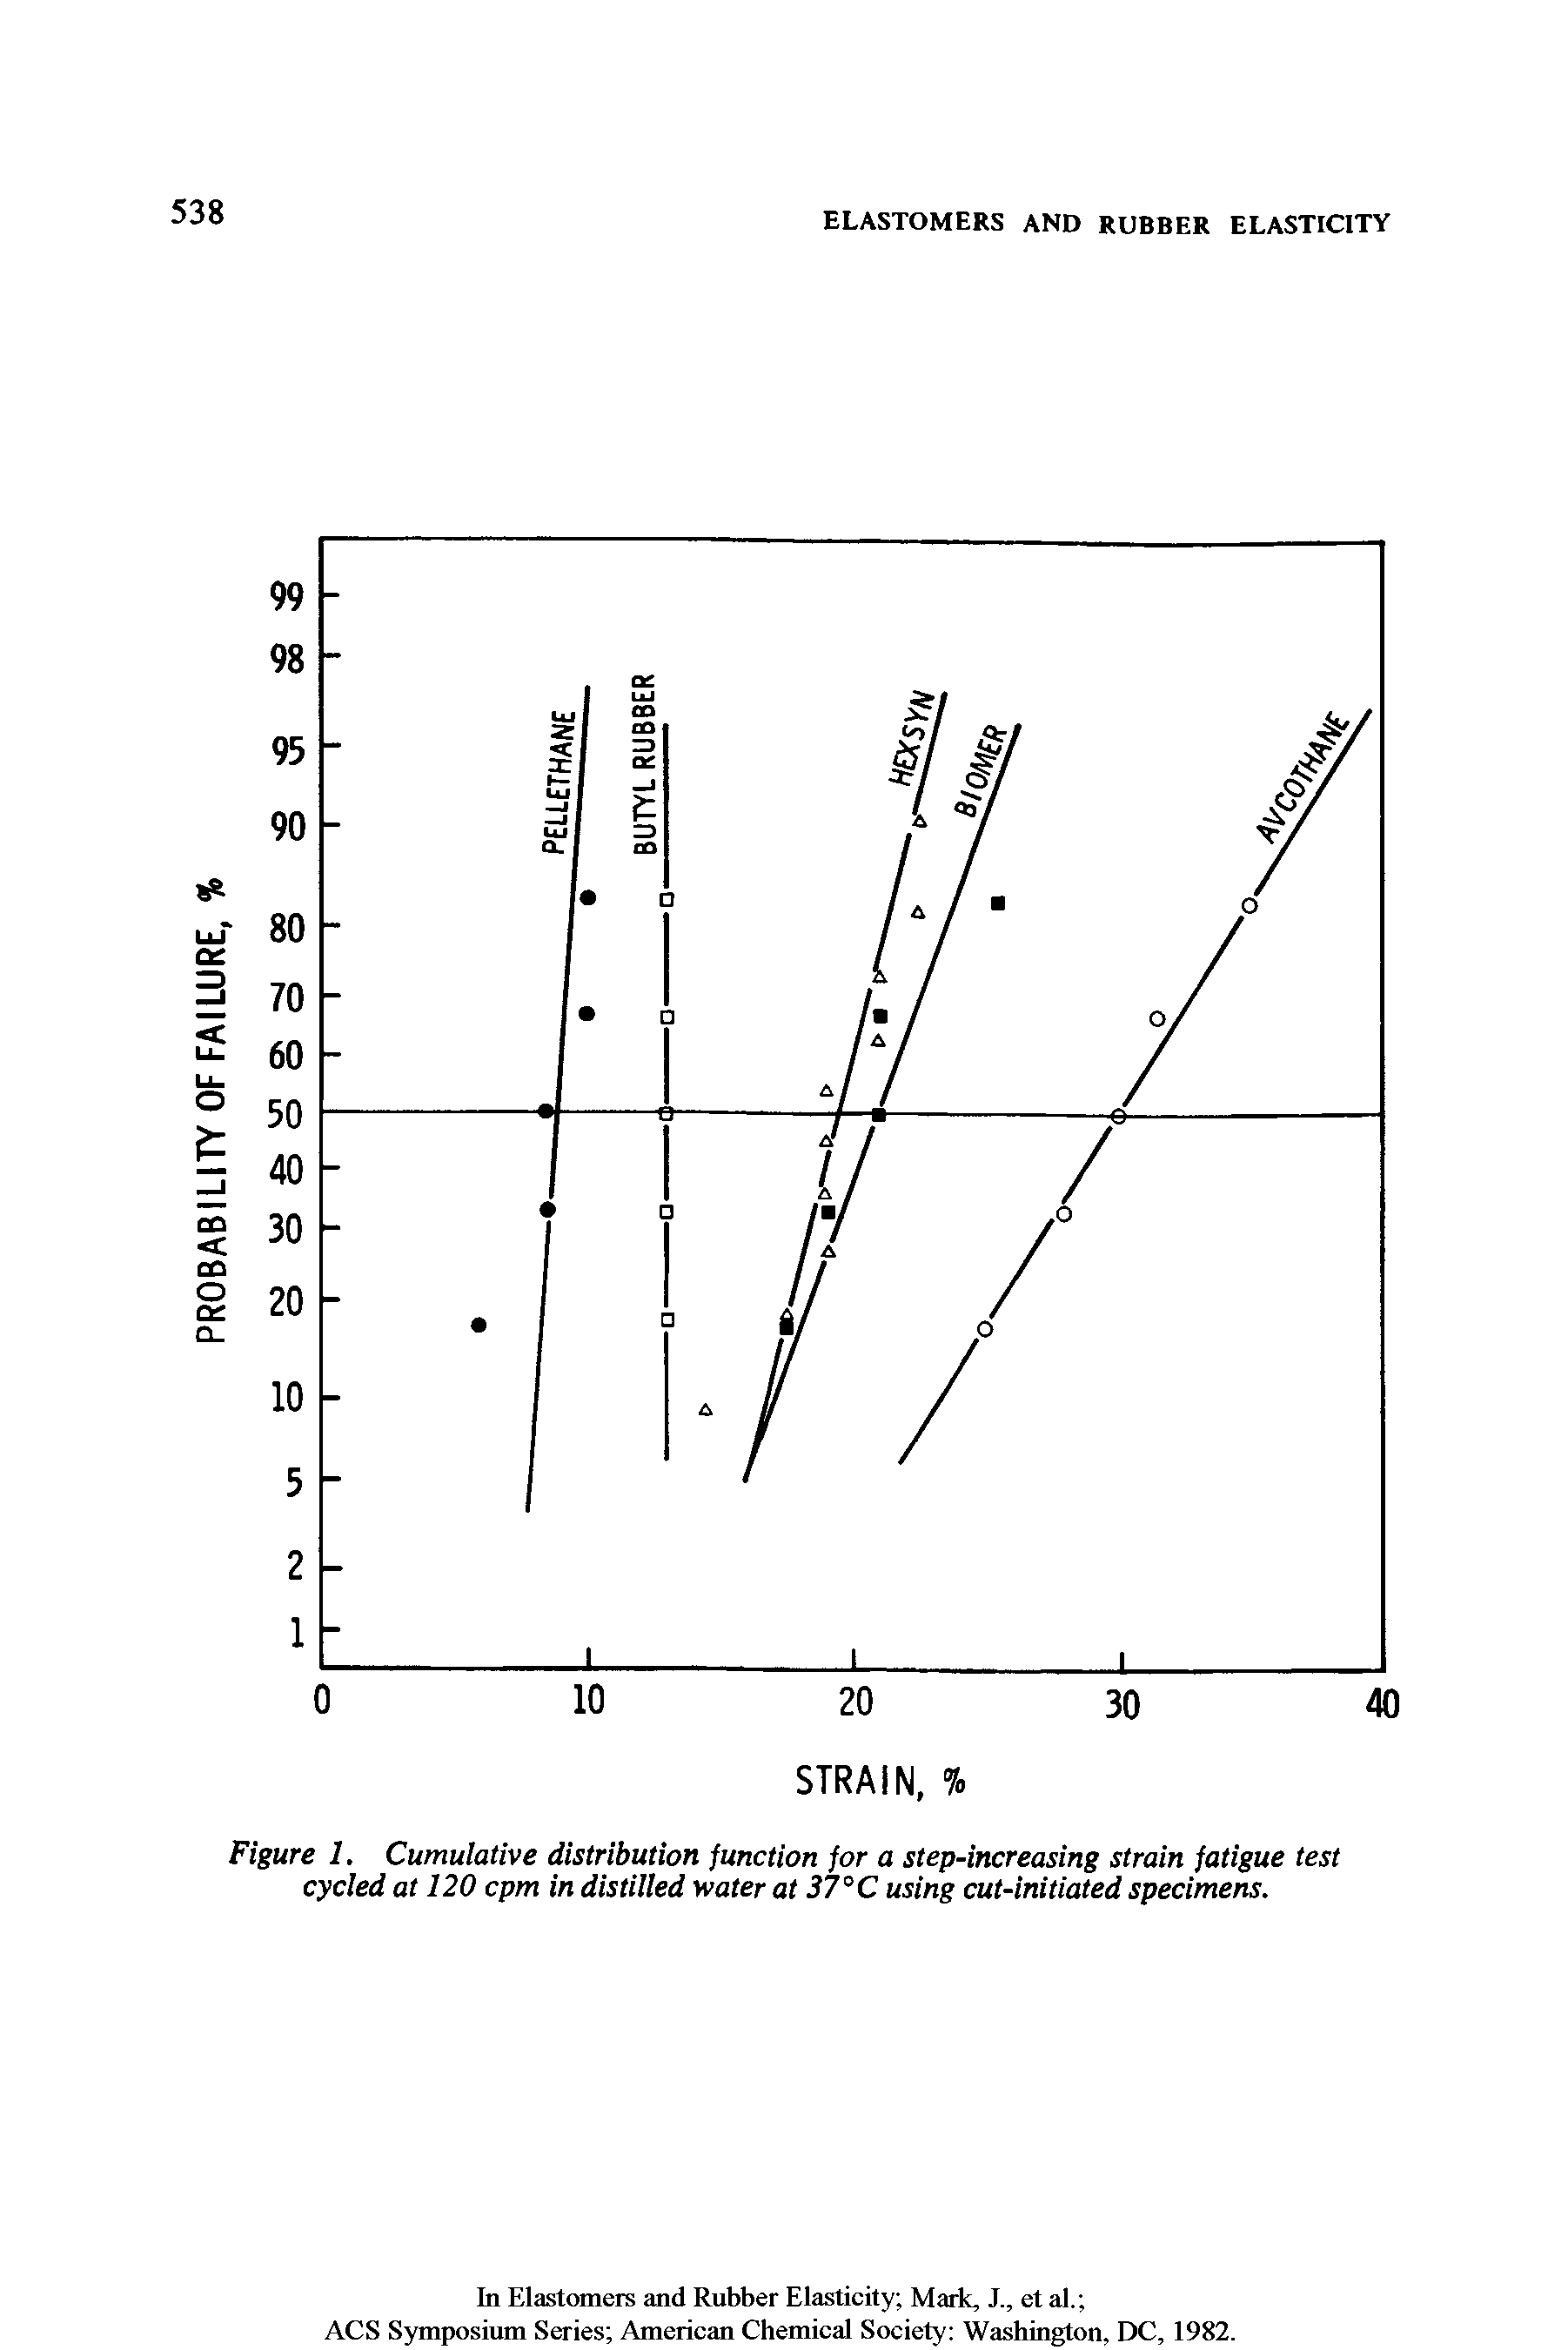 Figure 1. Cumulative distribution function for a step-increasing strain fatigue test cycled at 120 cpm in distilled water at 37° C using cut-initiated specimens.